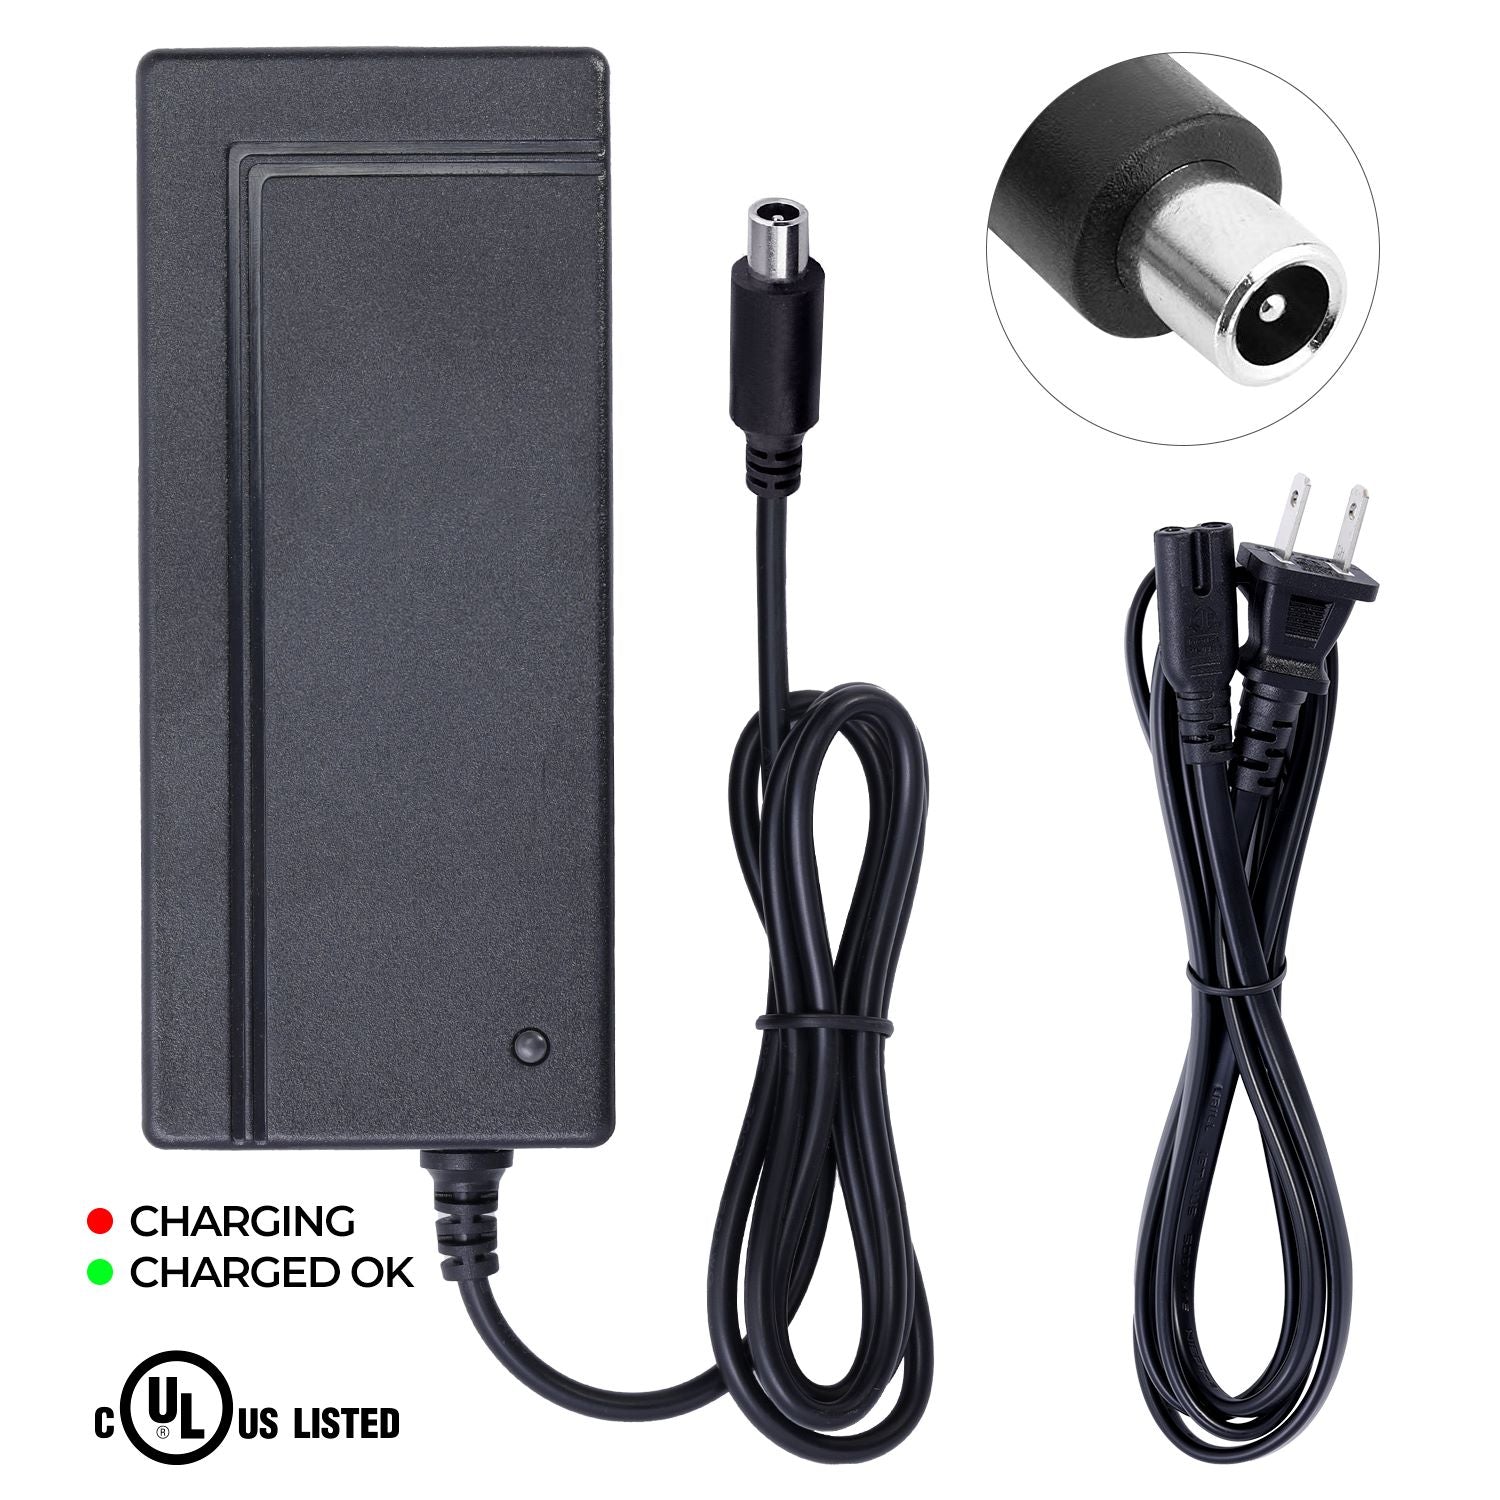 UL Certified Charger for Mongoose React E4 Electric Scooter (It does NOT work with E1 or E2)